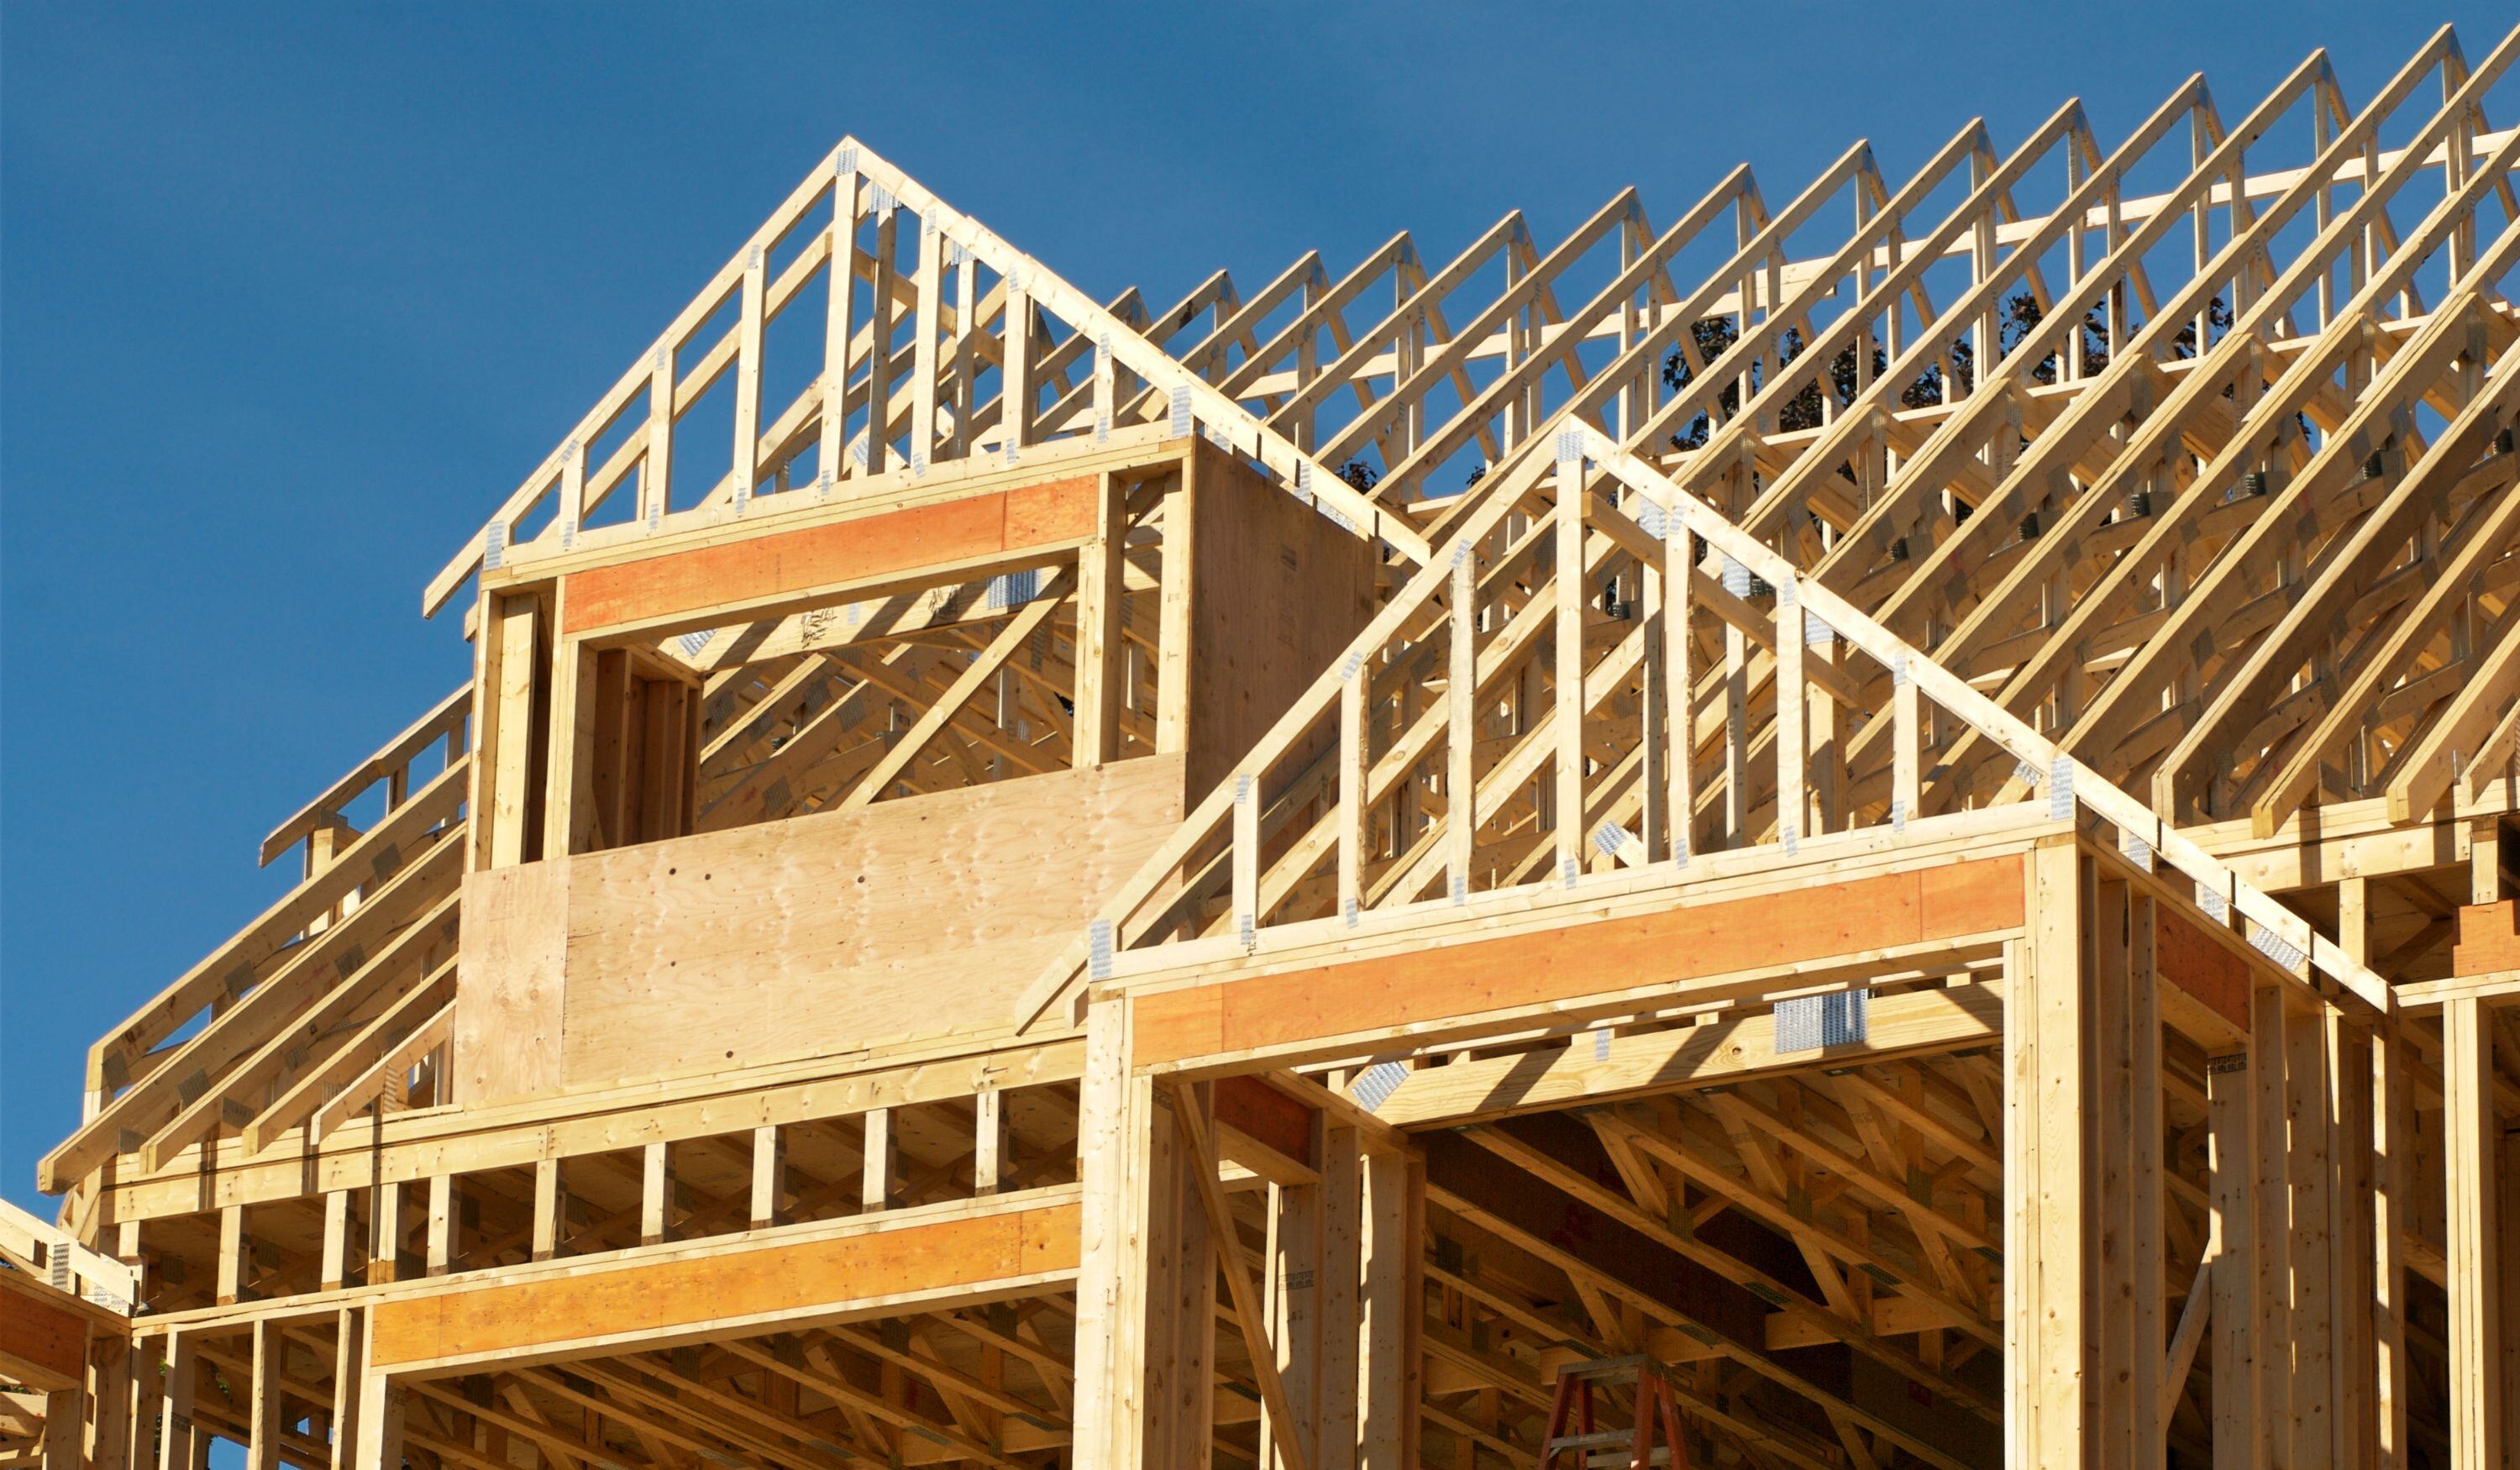 Construction Loan vs. Bridge Loan: What's the Difference?